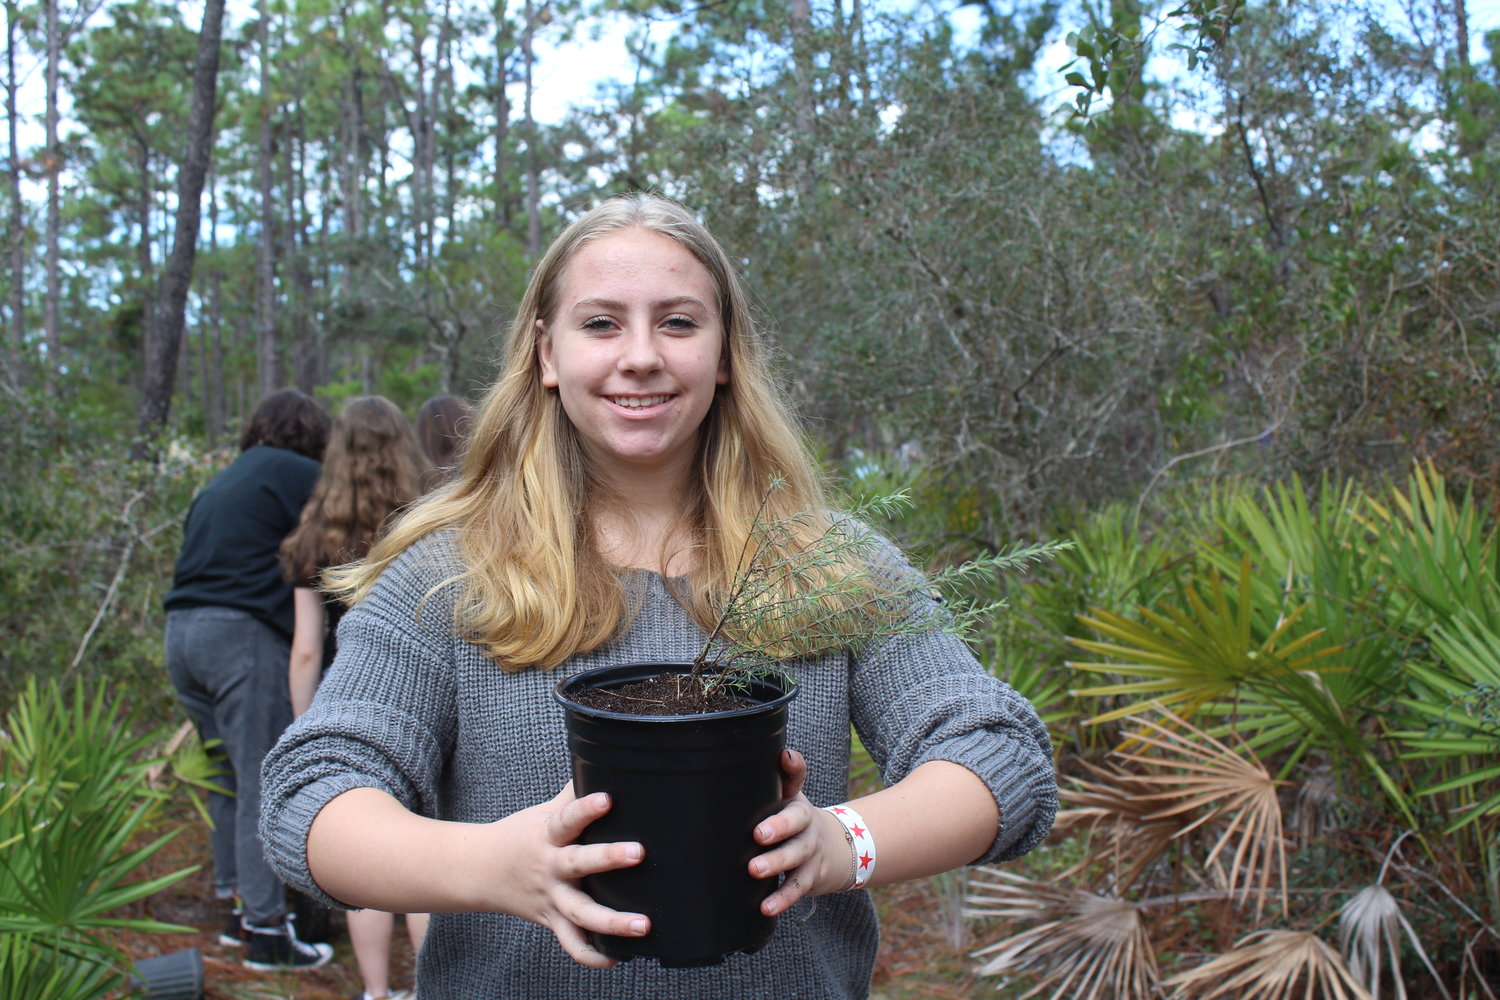 Native plants such as false rosemary were carefully dug up and potted by middle school students.